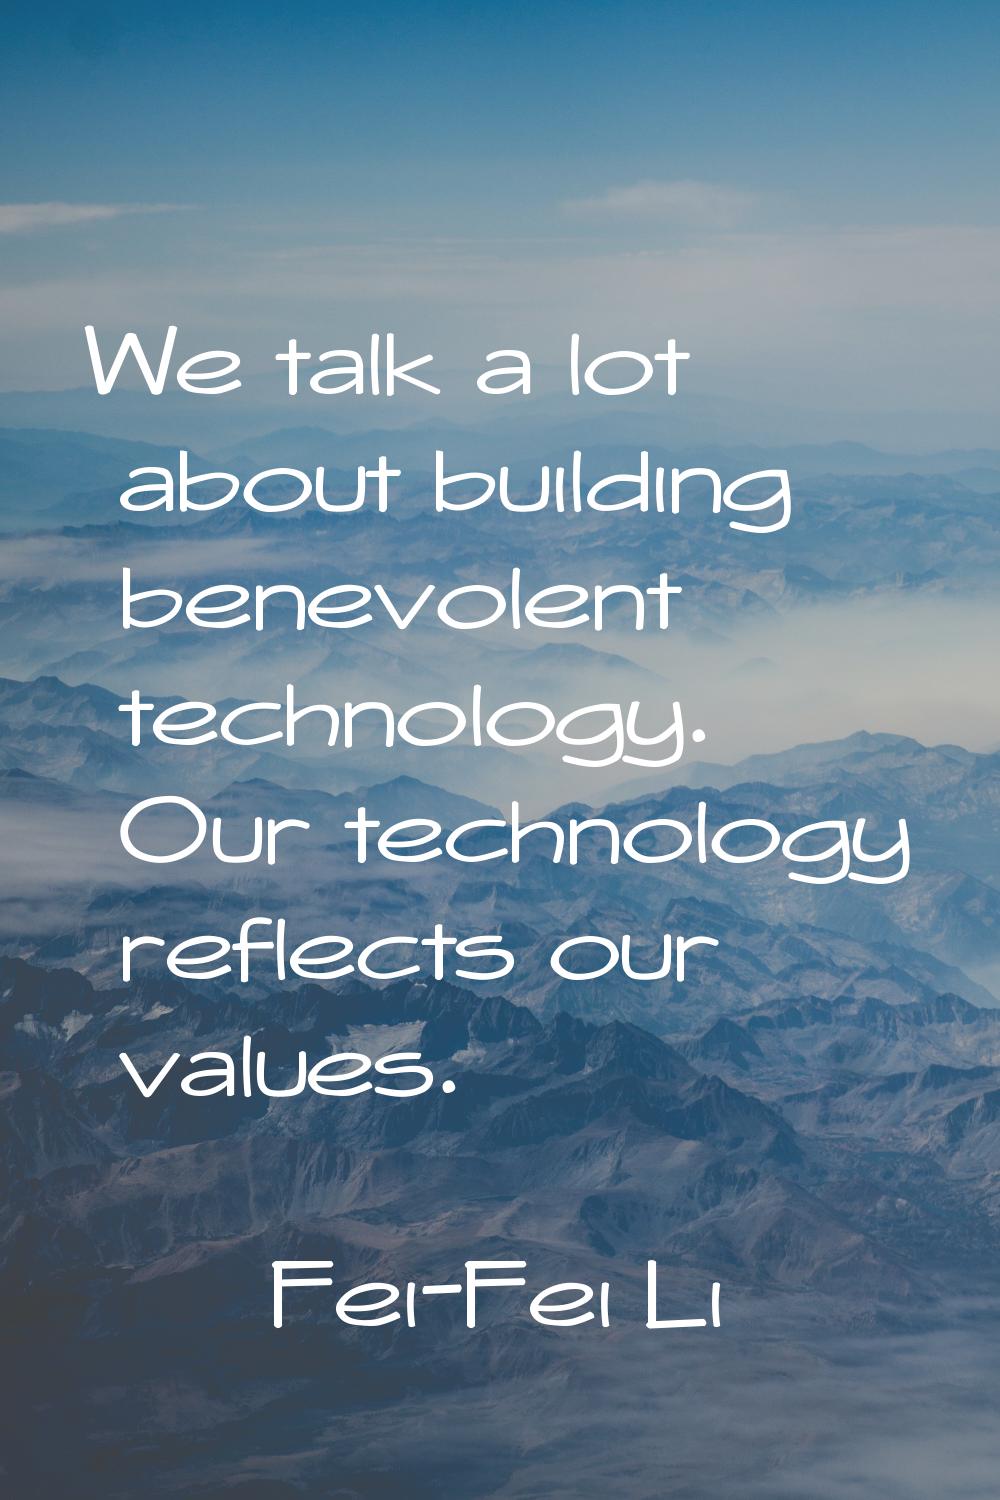 We talk a lot about building benevolent technology. Our technology reflects our values.